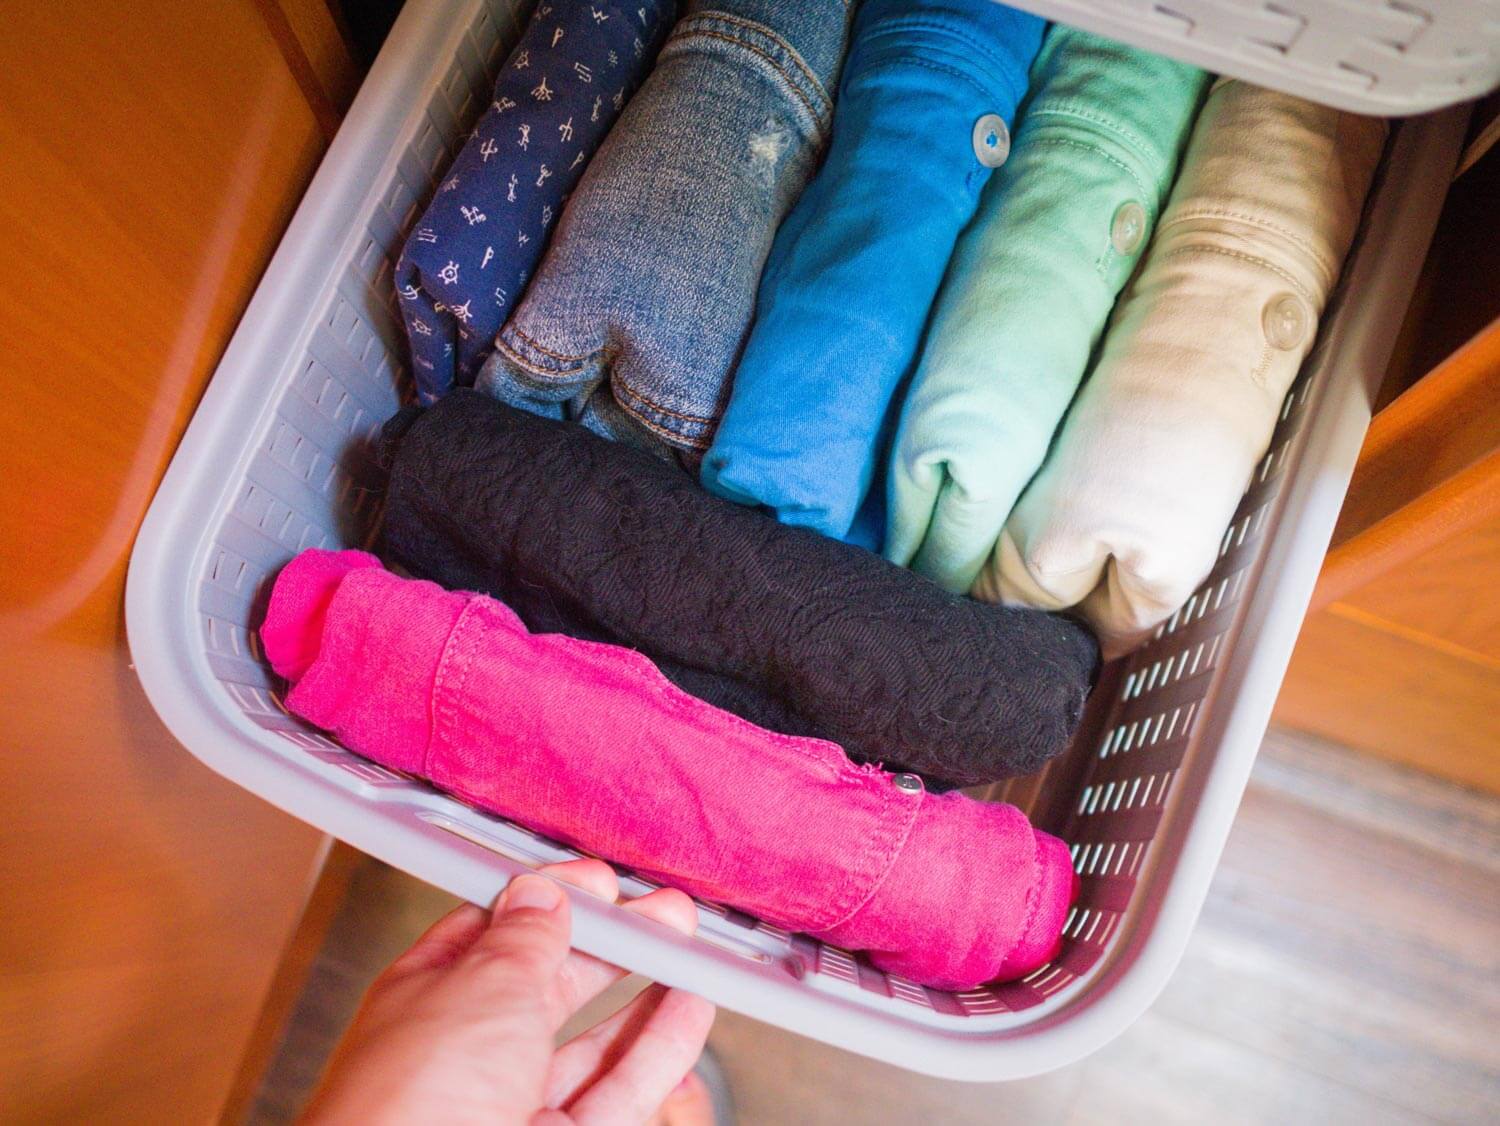 shorts folded and organized in basket